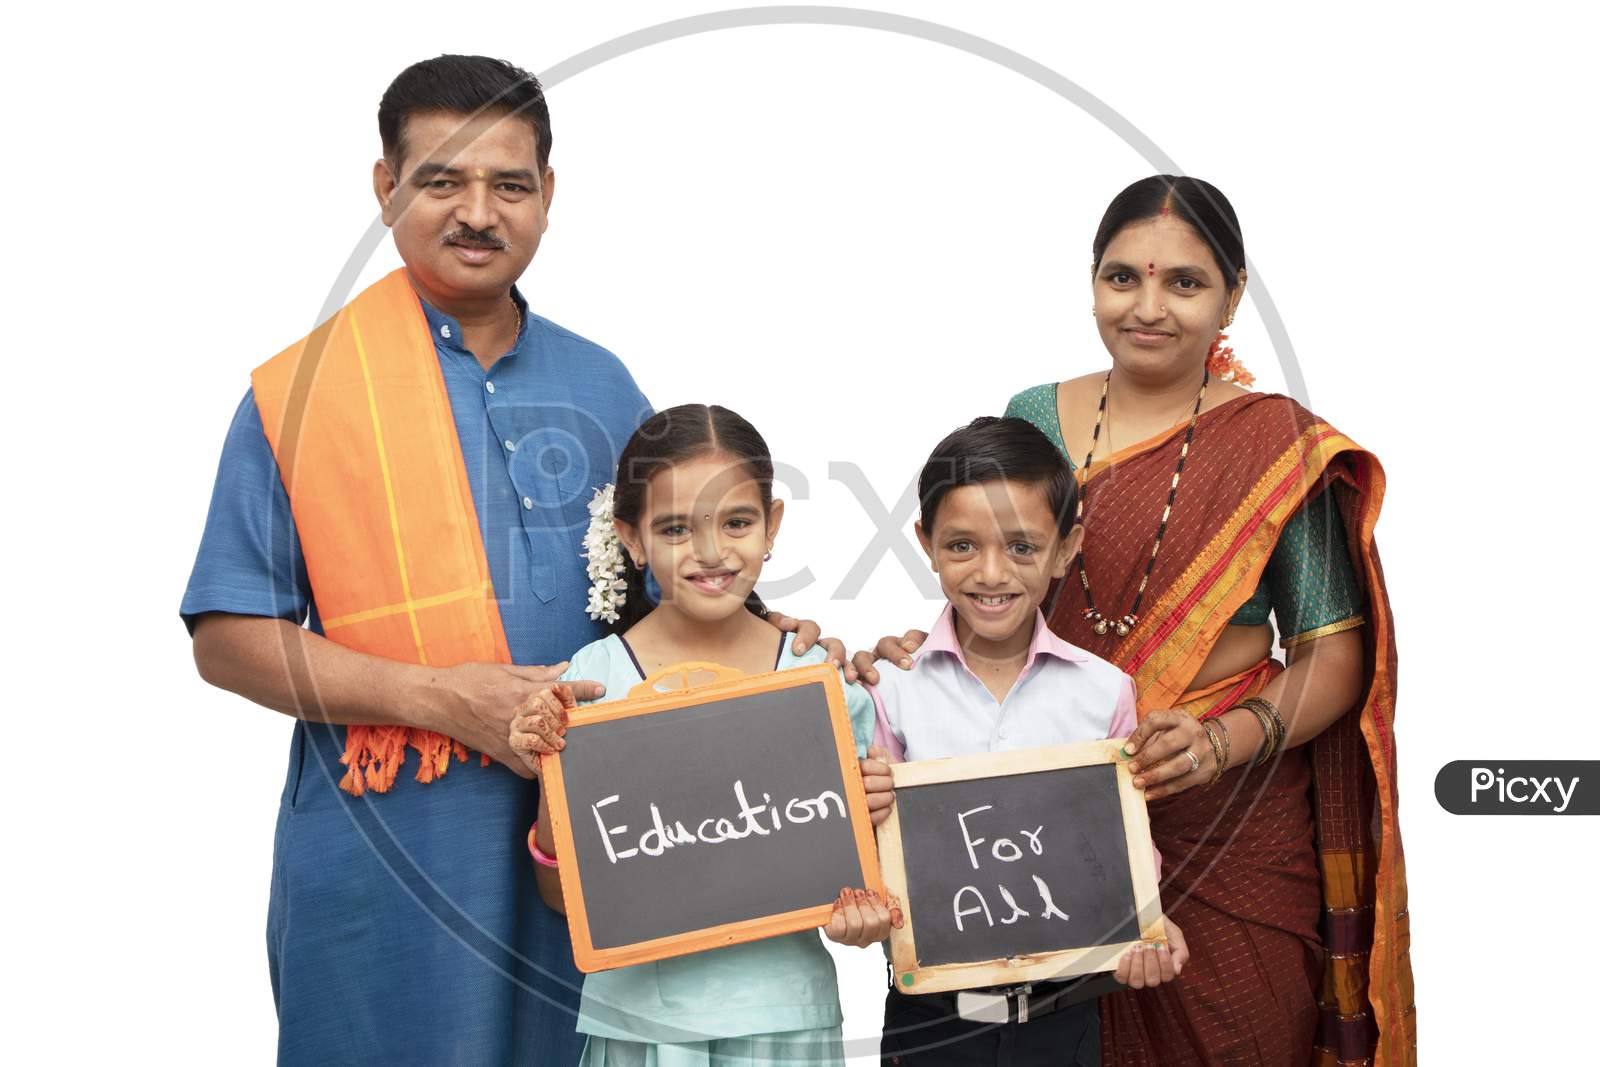 Concept Of Education For All Children Holding Slate With Traditional Indian Family On Isolated Background